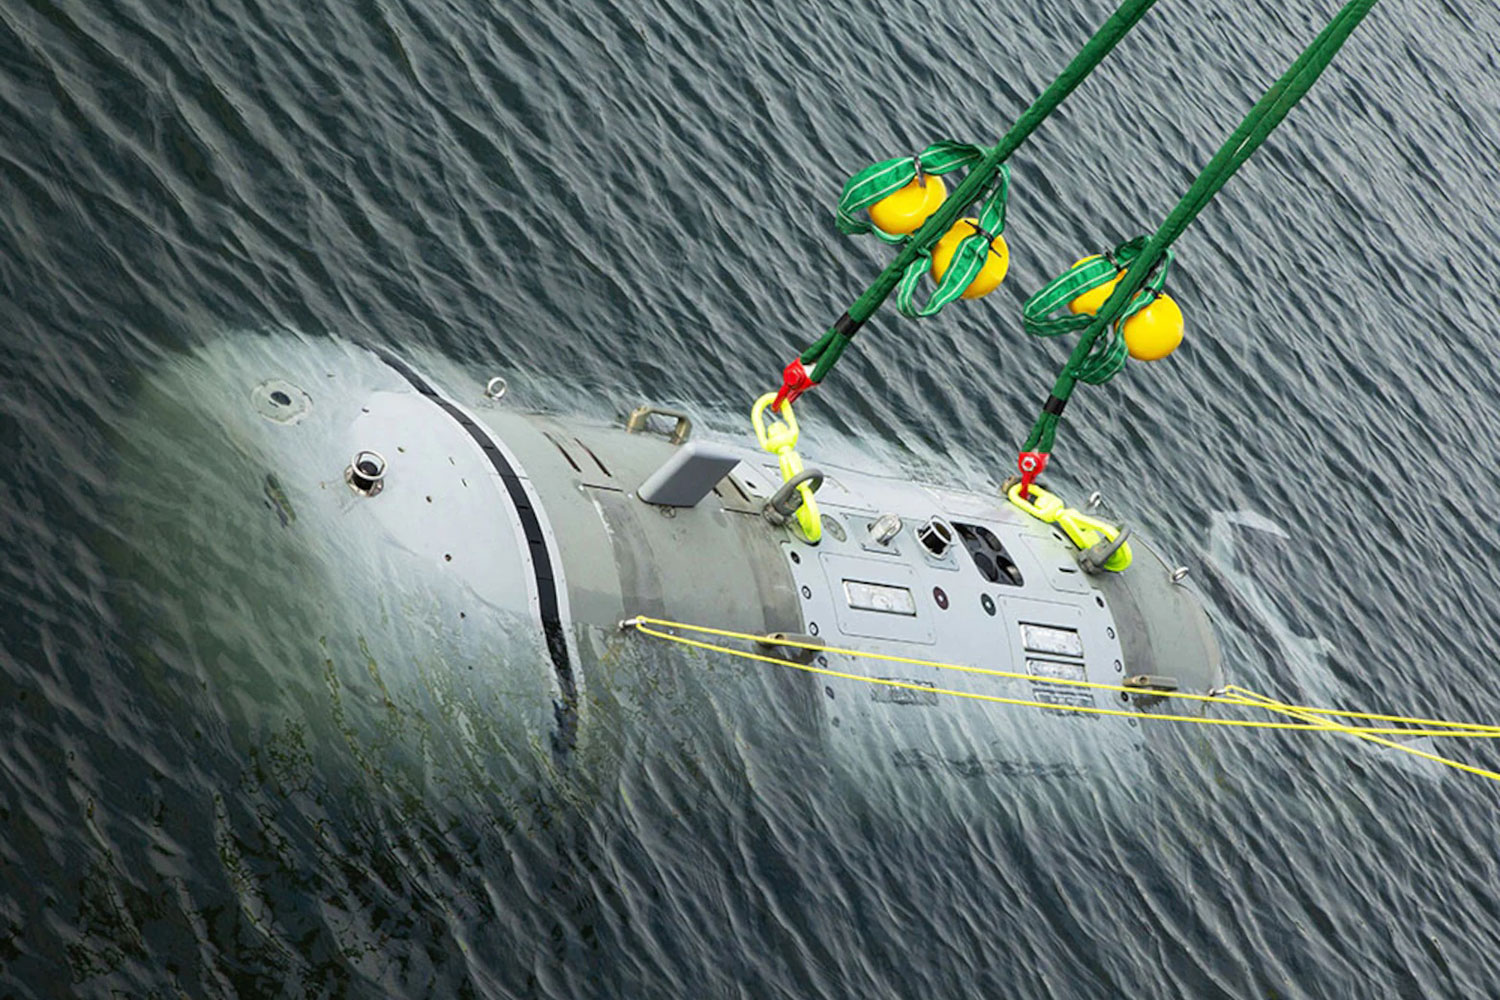 The U.S. Navy showcases its new Snakehead unmanned submarine.